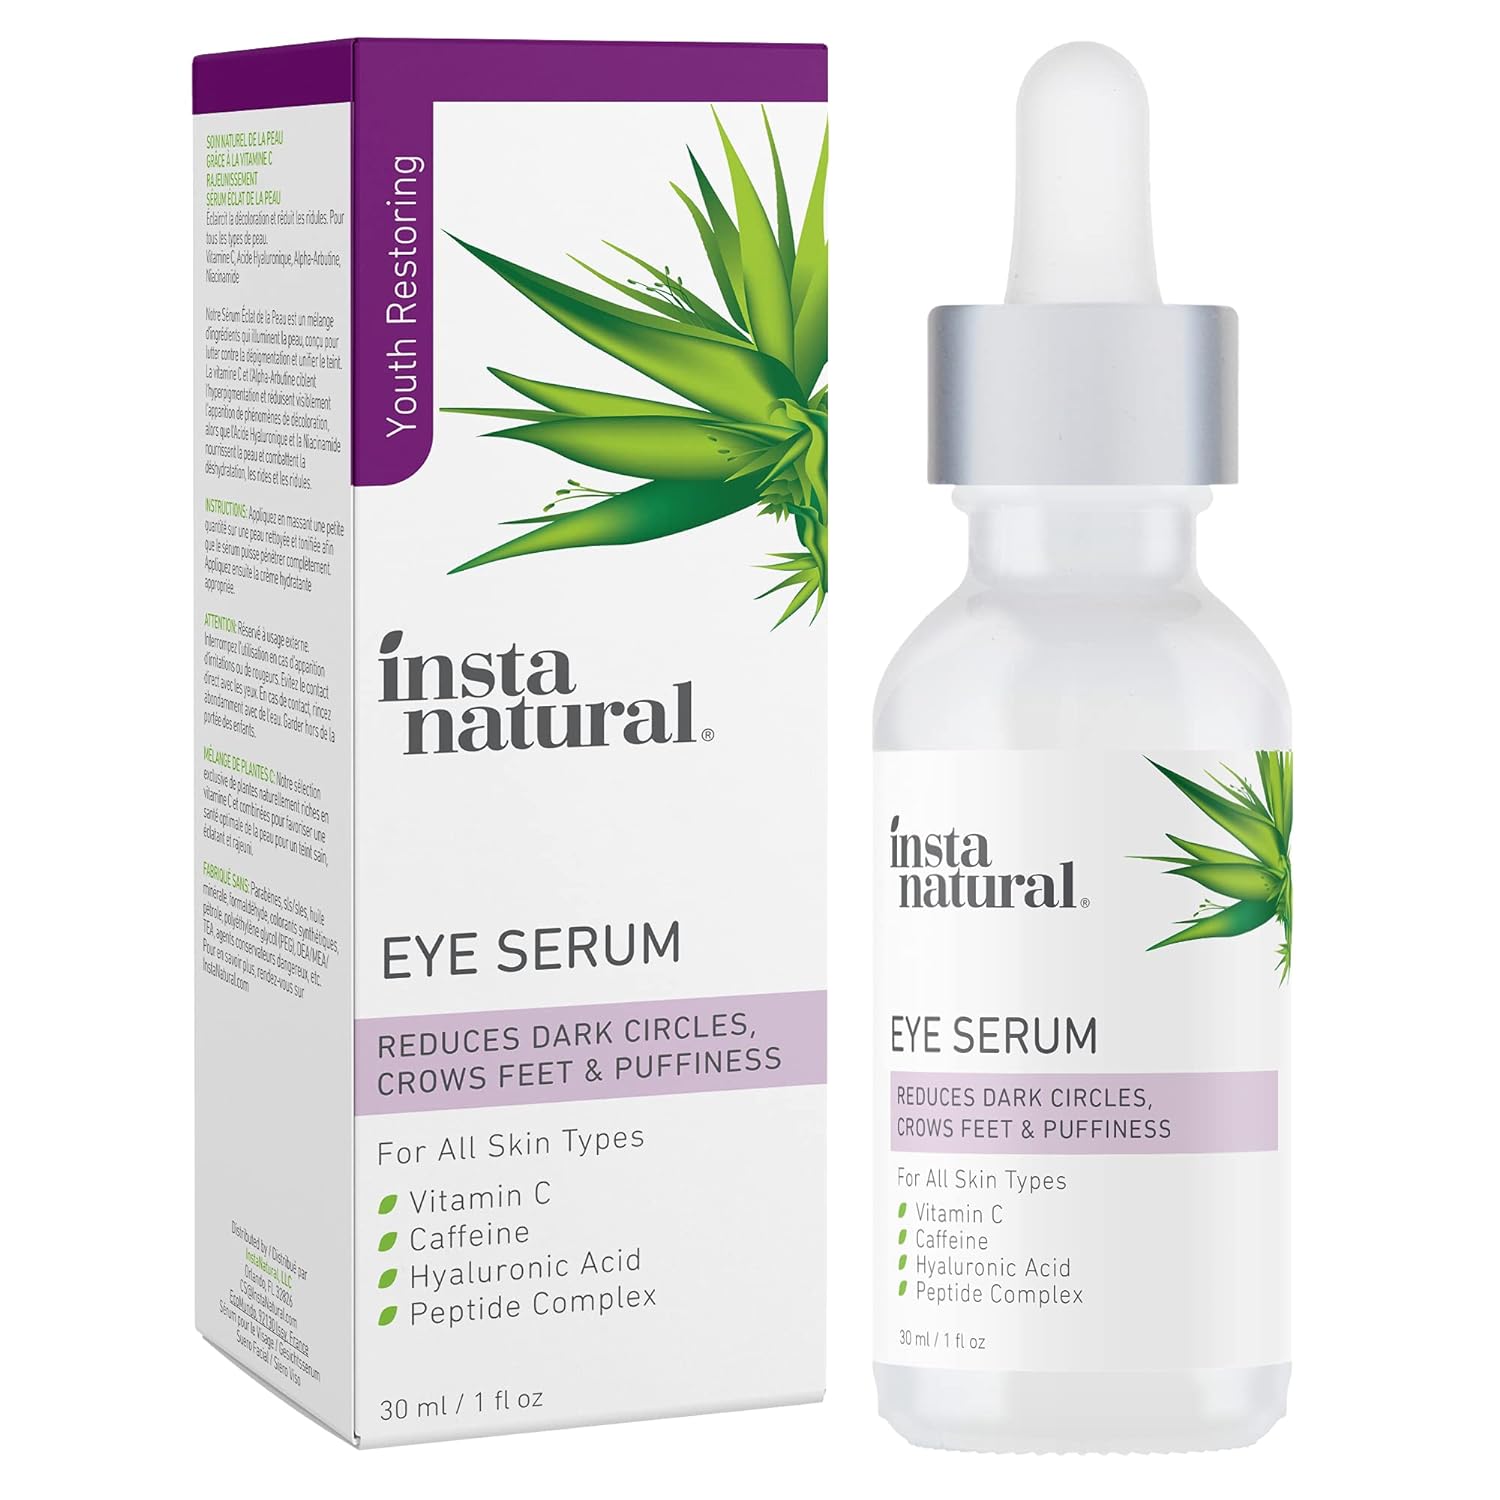 InstaNatural Eye Serum, Brightens, Minimizes the Appearance of Fine Lines, Eye Puffiness and Dark Circles, with Vitamin C, Caffeine and Hyaluronic Acid, 1